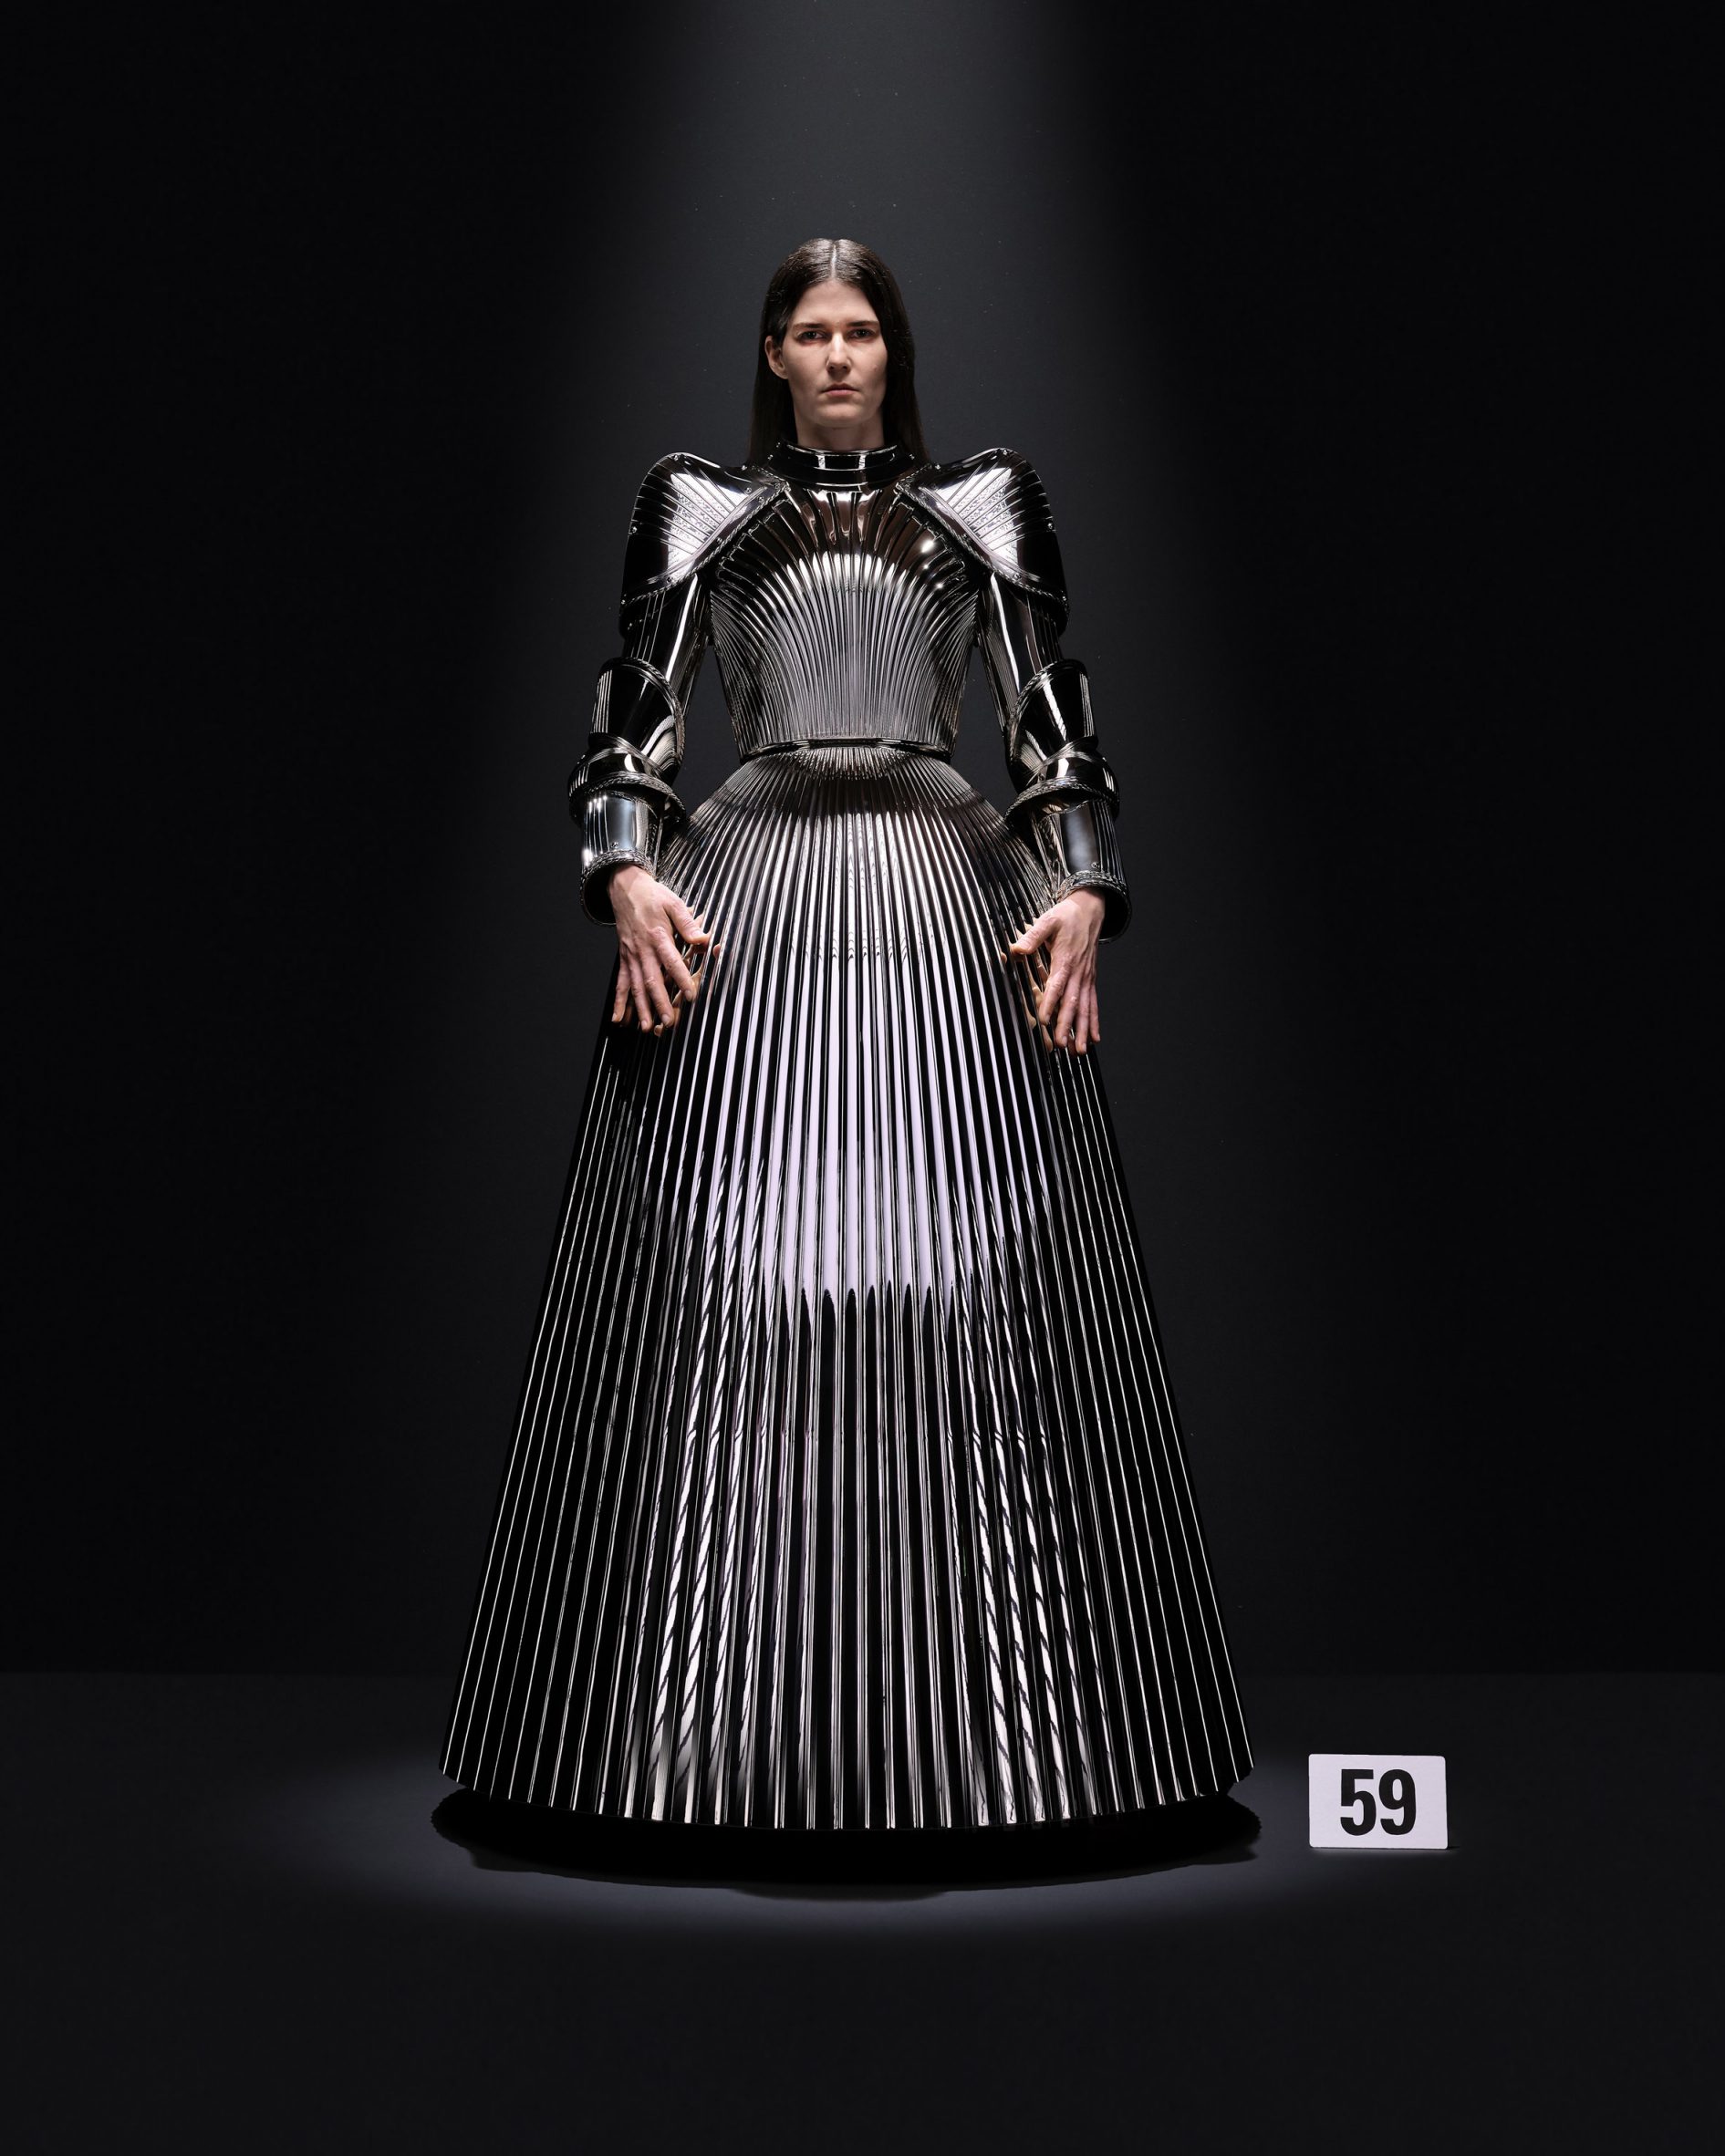 Photo of a 3D-printed dress